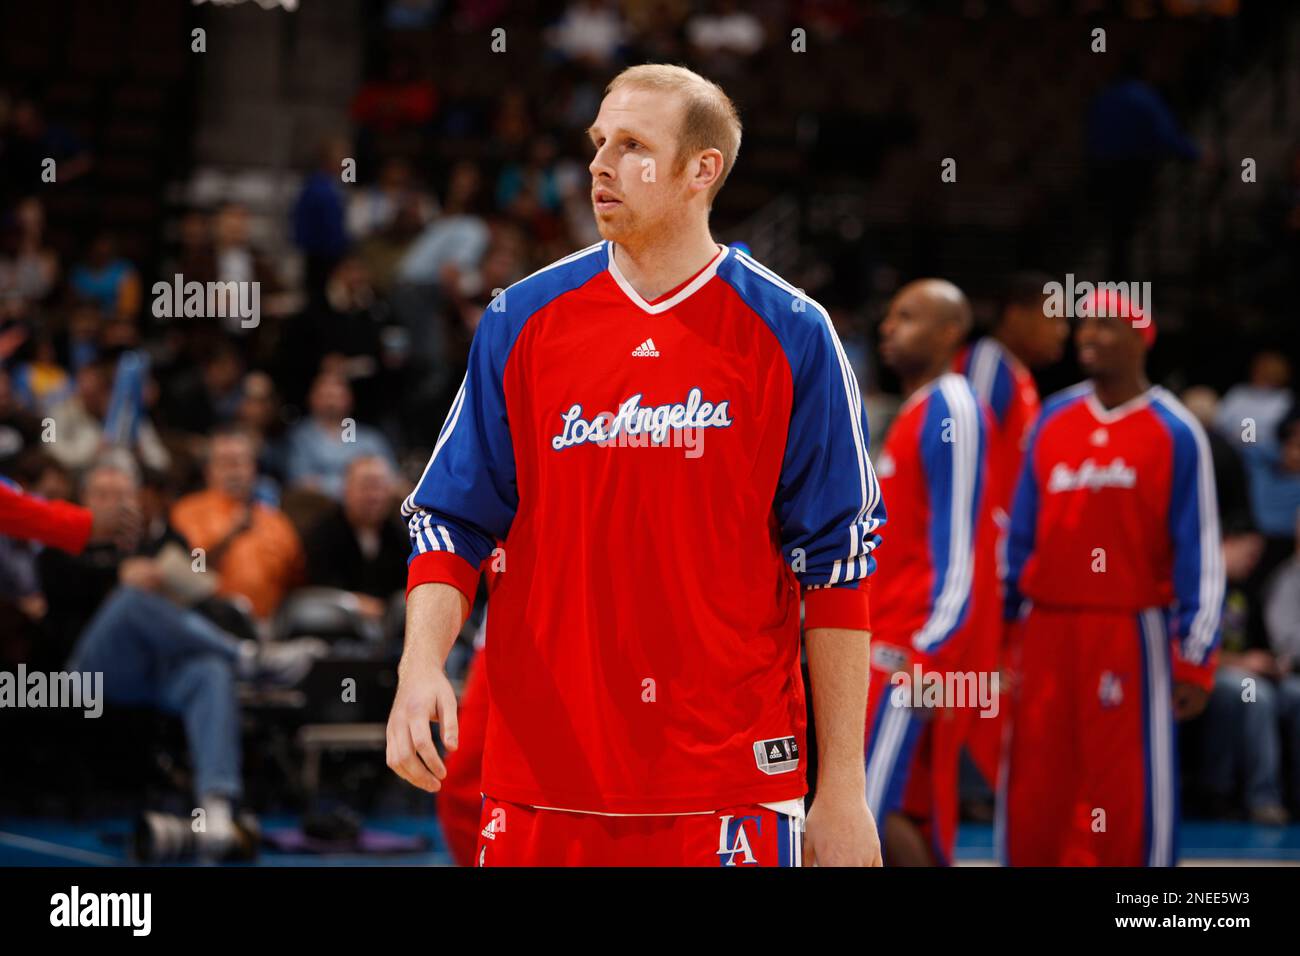 Los Angeles Clippers center Chris Kaman warms up before facing the Denver Nuggets in the first quarter of an NBA basketball game in Denver on Thursday, Jan. 21, 2010. (AP Photo/David Zalubowski) Stock Photo